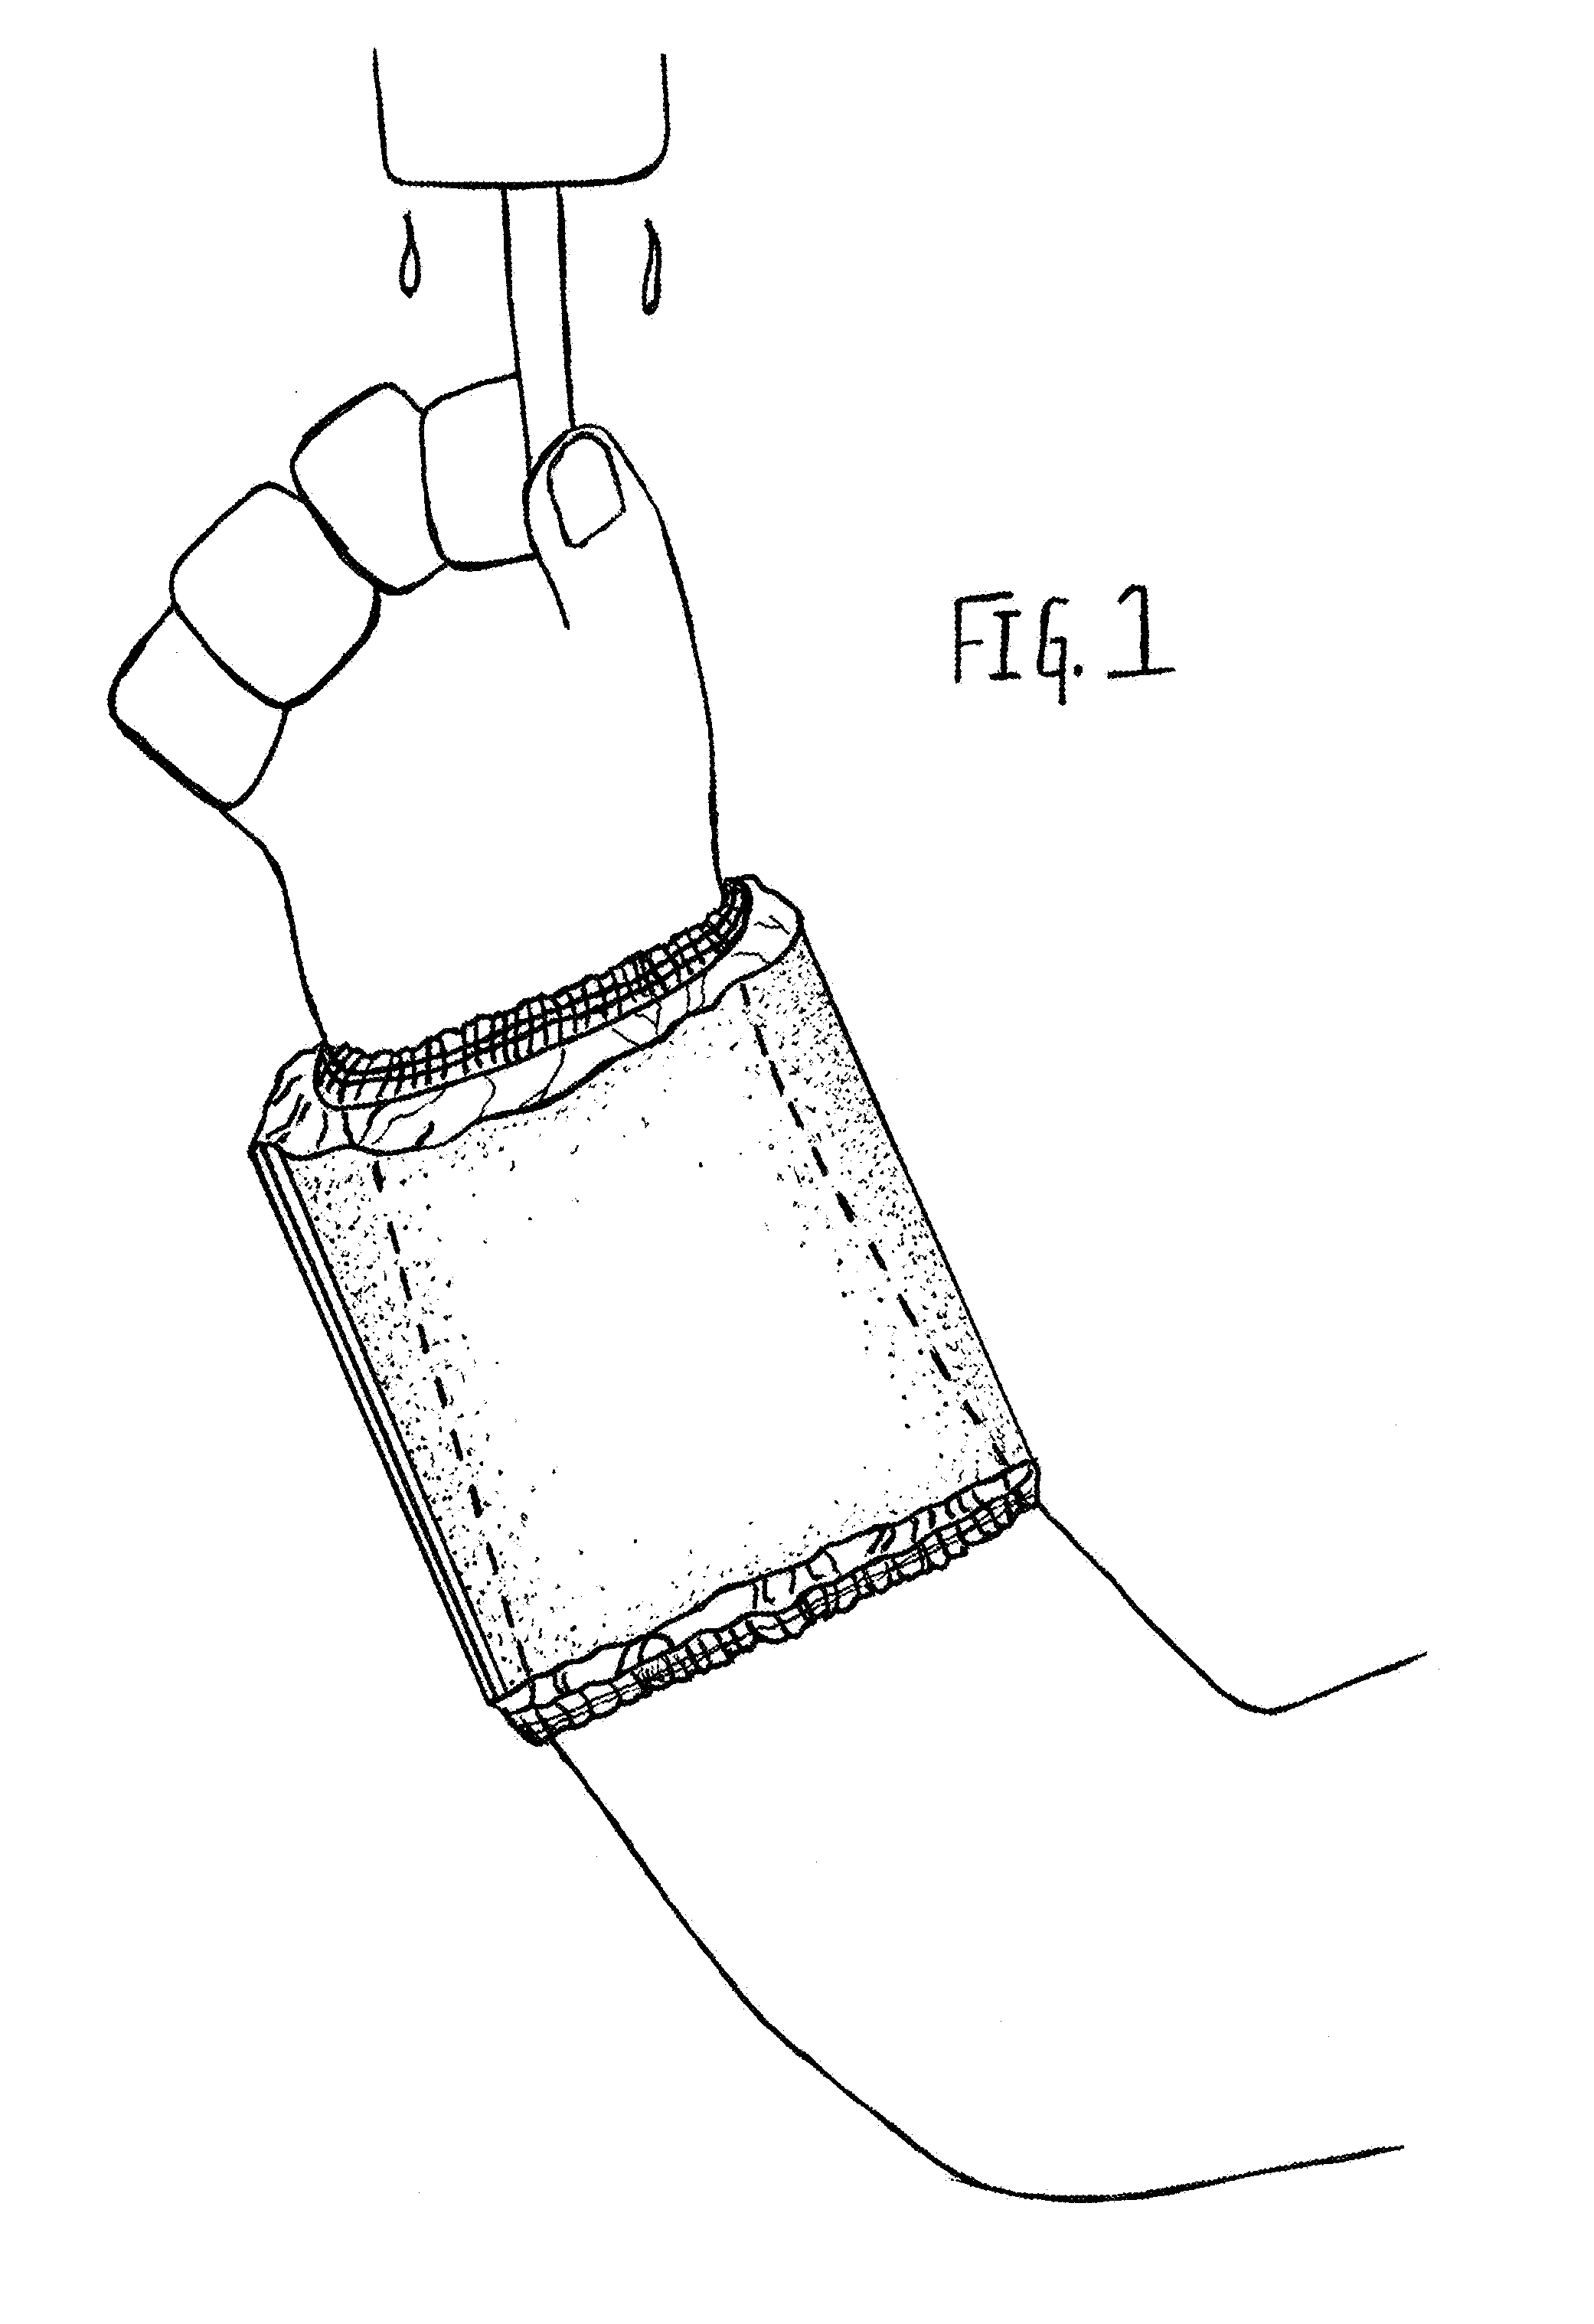 Disposable absorbent wrist band